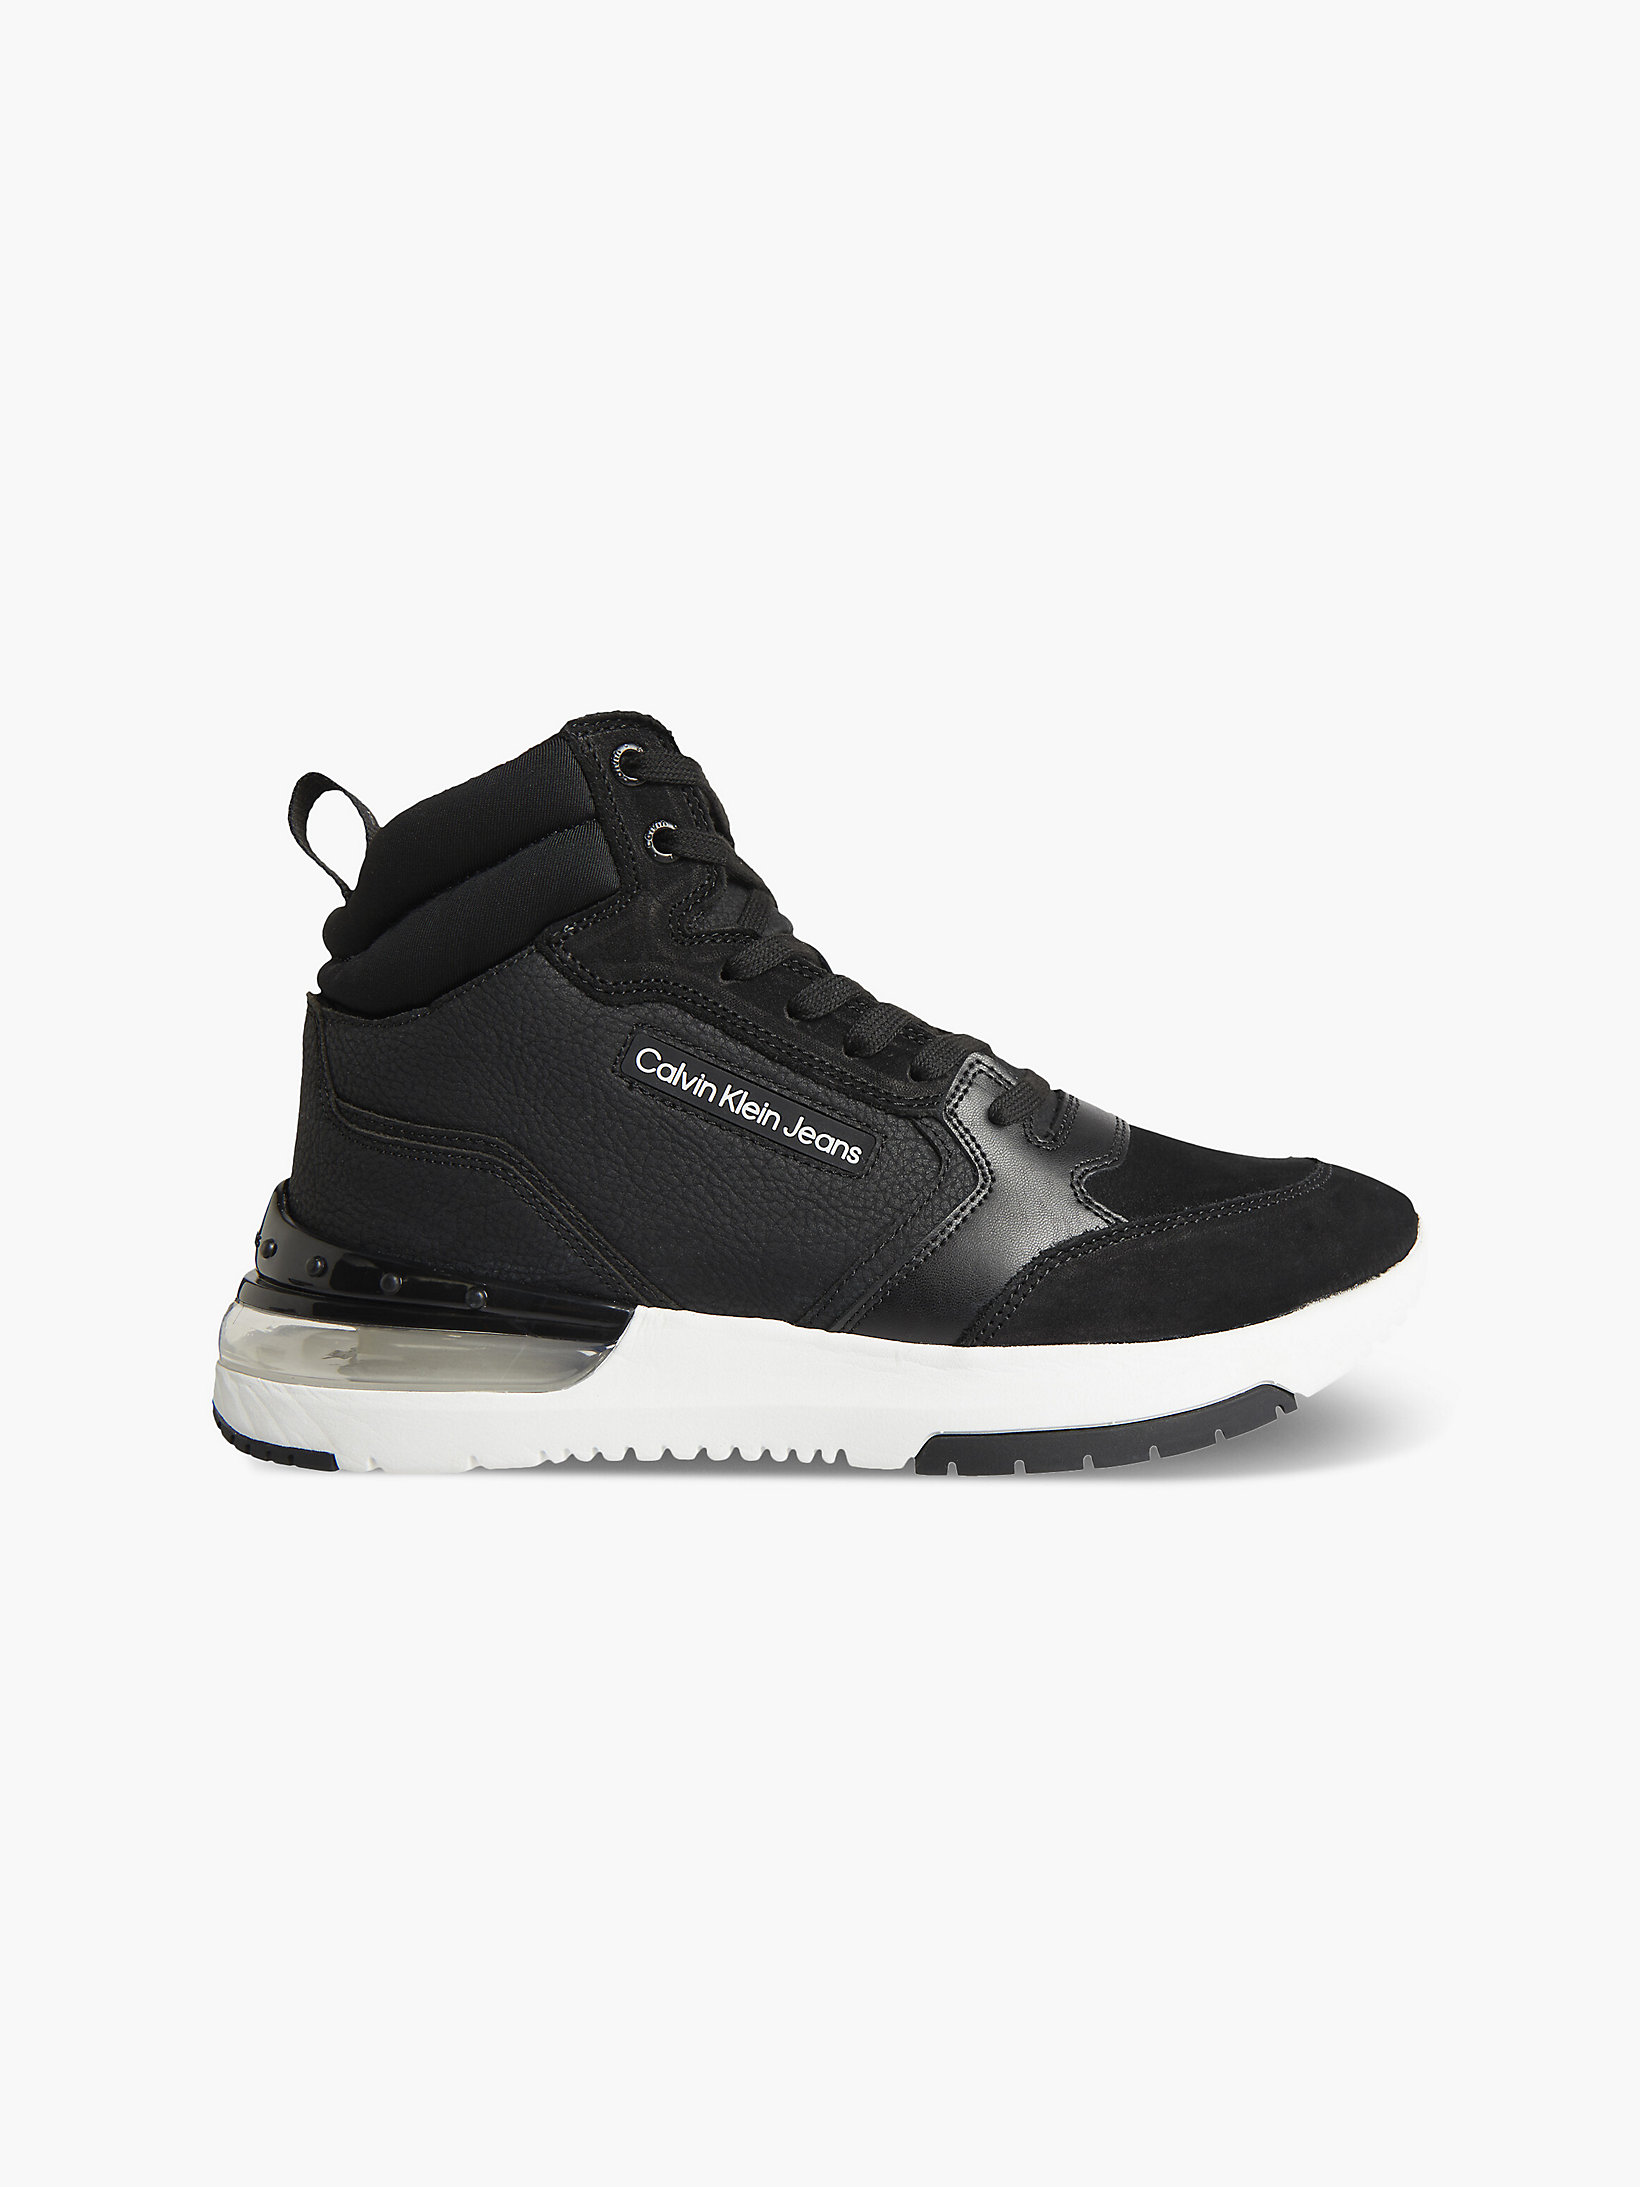 Black Leather High-Top Trainers undefined men Calvin Klein